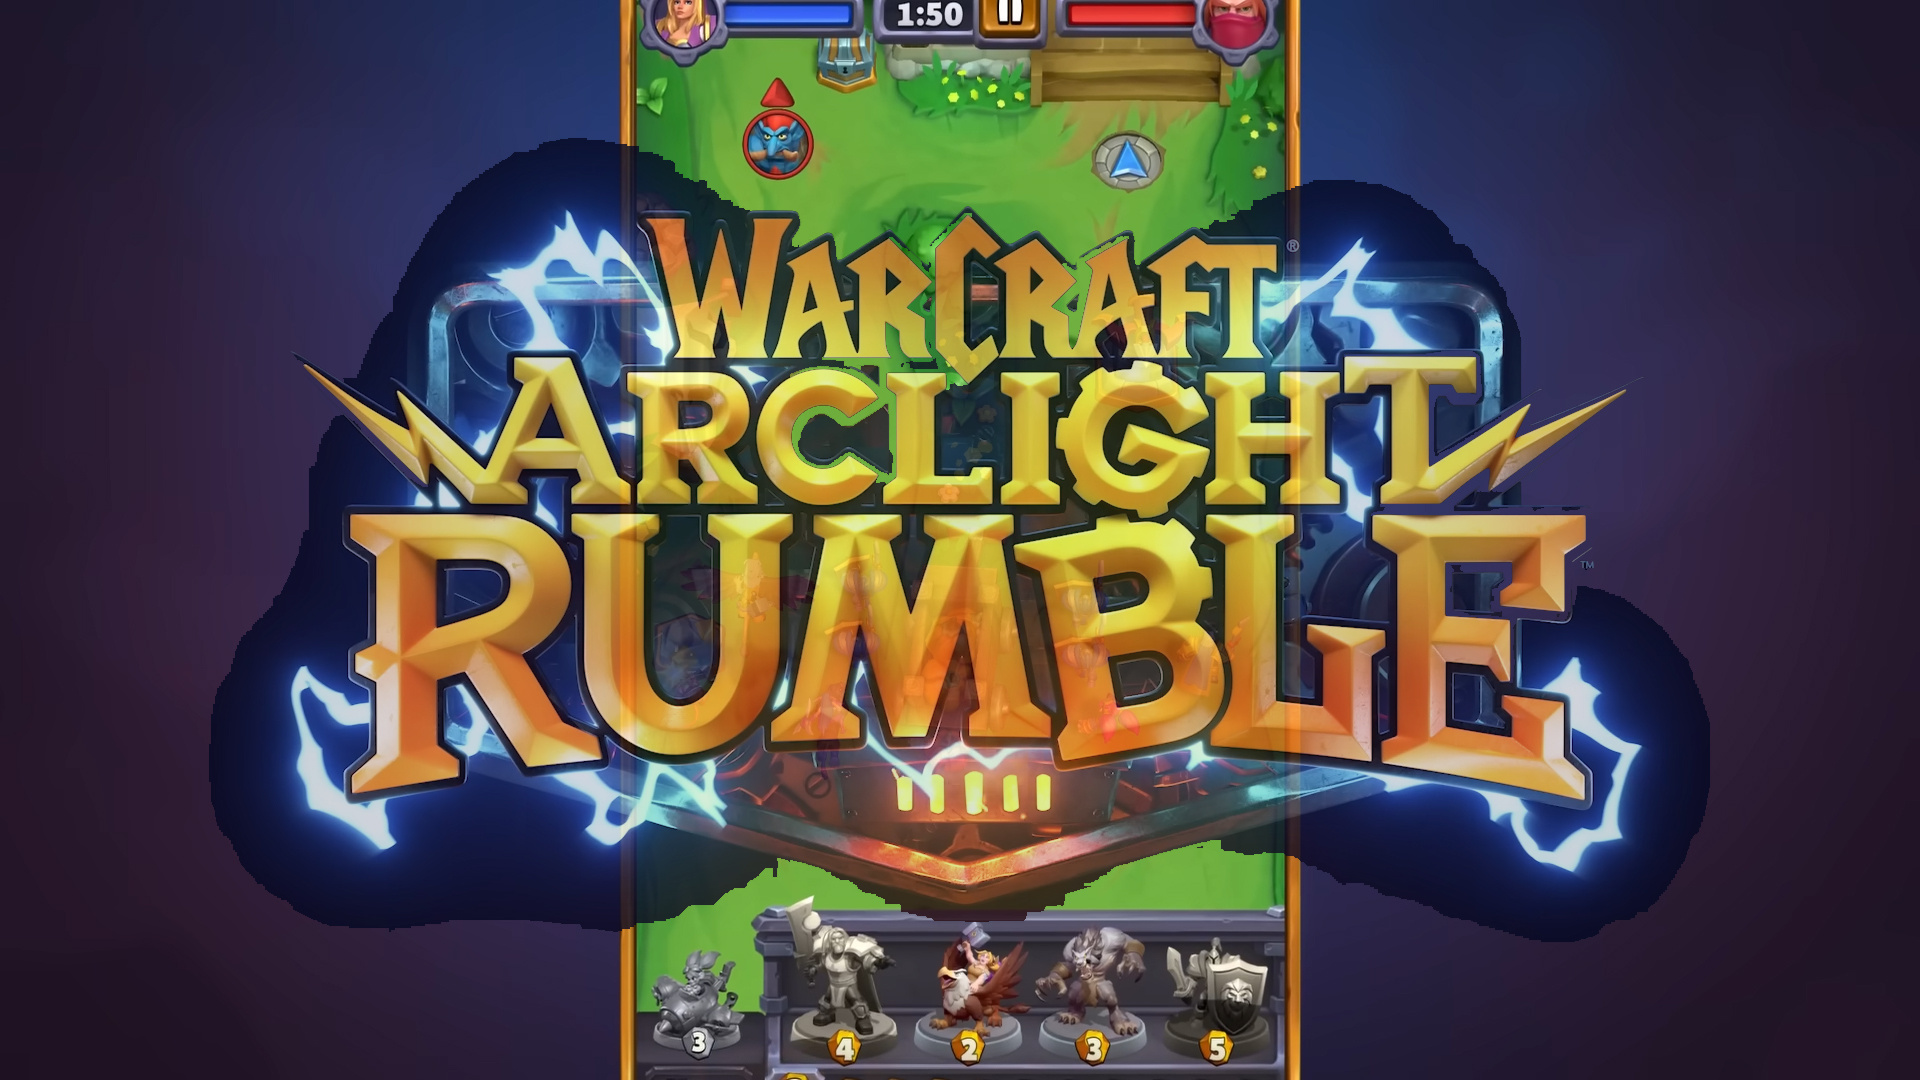 Warcraft Arclight Rumble: The rival to Blizzard's Clash Royale, A free-to-play mobile game. 1920x1080 Full HD Wallpaper.